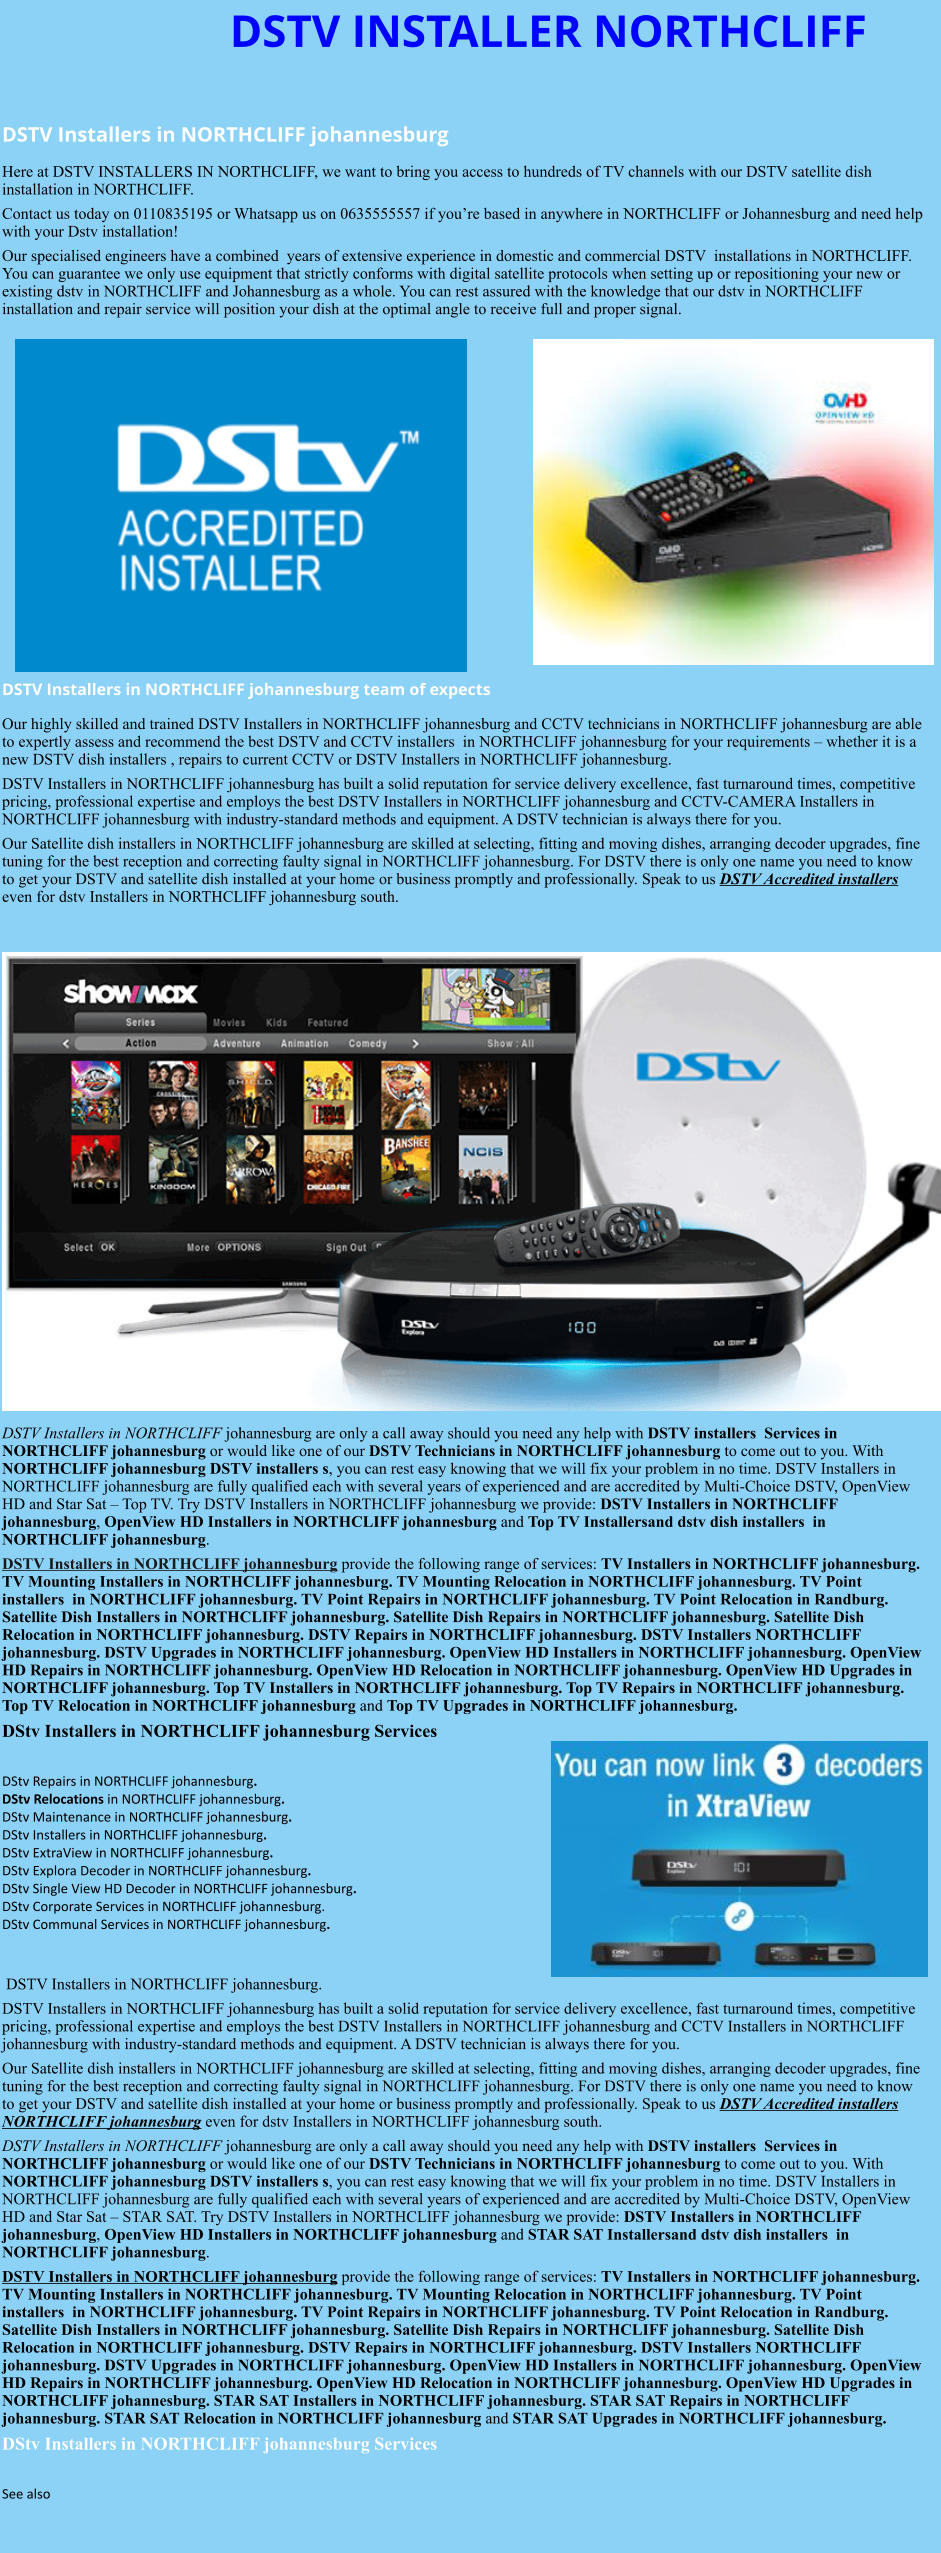 DSTV INSTALLER NORTHCLIFF  DSTV Installers in NORTHCLIFF johannesburg  Here at DSTV INSTALLERS IN NORTHCLIFF, we want to bring you access to hundreds of TV channels with our DSTV satellite dish installation in NORTHCLIFF. Contact us today on 0110835195 or Whatsapp us on 0635555557 if you’re based in anywhere in NORTHCLIFF or Johannesburg and need help with your Dstv installation! Our specialised engineers have a combined  years of extensive experience in domestic and commercial DSTV  installations in NORTHCLIFF. You can guarantee we only use equipment that strictly conforms with digital satellite protocols when setting up or repositioning your new or existing dstv in NORTHCLIFF and Johannesburg as a whole. You can rest assured with the knowledge that our dstv in NORTHCLIFF installation and repair service will position your dish at the optimal angle to receive full and proper signal.               DSTV Installers in NORTHCLIFF johannesburg team of expects Our highly skilled and trained DSTV Installers in NORTHCLIFF johannesburg and CCTV technicians in NORTHCLIFF johannesburg are able to expertly assess and recommend the best DSTV and CCTV installers  in NORTHCLIFF johannesburg for your requirements – whether it is a new DSTV dish installers , repairs to current CCTV or DSTV Installers in NORTHCLIFF johannesburg. DSTV Installers in NORTHCLIFF johannesburg has built a solid reputation for service delivery excellence, fast turnaround times, competitive pricing, professional expertise and employs the best DSTV Installers in NORTHCLIFF johannesburg and CCTV-CAMERA Installers in NORTHCLIFF johannesburg with industry-standard methods and equipment. A DSTV technician is always there for you. Our Satellite dish installers in NORTHCLIFF johannesburg are skilled at selecting, fitting and moving dishes, arranging decoder upgrades, fine tuning for the best reception and correcting faulty signal in NORTHCLIFF johannesburg. For DSTV there is only one name you need to know to get your DSTV and satellite dish installed at your home or business promptly and professionally. Speak to us DSTV Accredited installers even for dstv Installers in NORTHCLIFF johannesburg south.                      DSTV Installers in NORTHCLIFF johannesburg are only a call away should you need any help with DSTV installers  Services in NORTHCLIFF johannesburg or would like one of our DSTV Technicians in NORTHCLIFF johannesburg to come out to you. With NORTHCLIFF johannesburg DSTV installers s, you can rest easy knowing that we will fix your problem in no time. DSTV Installers in NORTHCLIFF johannesburg are fully qualified each with several years of experienced and are accredited by Multi-Choice DSTV, OpenView HD and Star Sat – Top TV. Try DSTV Installers in NORTHCLIFF johannesburg we provide: DSTV Installers in NORTHCLIFF johannesburg, OpenView HD Installers in NORTHCLIFF johannesburg and Top TV Installersand dstv dish installers  in NORTHCLIFF johannesburg. DSTV Installers in NORTHCLIFF johannesburg provide the following range of services: TV Installers in NORTHCLIFF johannesburg. TV Mounting Installers in NORTHCLIFF johannesburg. TV Mounting Relocation in NORTHCLIFF johannesburg. TV Point installers  in NORTHCLIFF johannesburg. TV Point Repairs in NORTHCLIFF johannesburg. TV Point Relocation in Randburg. Satellite Dish Installers in NORTHCLIFF johannesburg. Satellite Dish Repairs in NORTHCLIFF johannesburg. Satellite Dish Relocation in NORTHCLIFF johannesburg. DSTV Repairs in NORTHCLIFF johannesburg. DSTV Installers NORTHCLIFF johannesburg. DSTV Upgrades in NORTHCLIFF johannesburg. OpenView HD Installers in NORTHCLIFF johannesburg. OpenView HD Repairs in NORTHCLIFF johannesburg. OpenView HD Relocation in NORTHCLIFF johannesburg. OpenView HD Upgrades in NORTHCLIFF johannesburg. Top TV Installers in NORTHCLIFF johannesburg. Top TV Repairs in NORTHCLIFF johannesburg. Top TV Relocation in NORTHCLIFF johannesburg and Top TV Upgrades in NORTHCLIFF johannesburg. DStv Installers in NORTHCLIFF johannesburg Services  DStv Repairs in NORTHCLIFF johannesburg.  DStv Relocations in NORTHCLIFF johannesburg.  DStv Maintenance in NORTHCLIFF johannesburg. DStv Installers in NORTHCLIFF johannesburg. DStv ExtraView in NORTHCLIFF johannesburg. DStv Explora Decoder in NORTHCLIFF johannesburg. DStv Single View HD Decoder in NORTHCLIFF johannesburg. DStv Corporate Services in NORTHCLIFF johannesburg. DStv Communal Services in NORTHCLIFF johannesburg.    DSTV Installers in NORTHCLIFF johannesburg. DSTV Installers in NORTHCLIFF johannesburg has built a solid reputation for service delivery excellence, fast turnaround times, competitive pricing, professional expertise and employs the best DSTV Installers in NORTHCLIFF johannesburg and CCTV Installers in NORTHCLIFF johannesburg with industry-standard methods and equipment. A DSTV technician is always there for you. Our Satellite dish installers in NORTHCLIFF johannesburg are skilled at selecting, fitting and moving dishes, arranging decoder upgrades, fine tuning for the best reception and correcting faulty signal in NORTHCLIFF johannesburg. For DSTV there is only one name you need to know to get your DSTV and satellite dish installed at your home or business promptly and professionally. Speak to us DSTV Accredited installers NORTHCLIFF johannesburg even for dstv Installers in NORTHCLIFF johannesburg south. DSTV Installers in NORTHCLIFF johannesburg are only a call away should you need any help with DSTV installers  Services in NORTHCLIFF johannesburg or would like one of our DSTV Technicians in NORTHCLIFF johannesburg to come out to you. With NORTHCLIFF johannesburg DSTV installers s, you can rest easy knowing that we will fix your problem in no time. DSTV Installers in NORTHCLIFF johannesburg are fully qualified each with several years of experienced and are accredited by Multi-Choice DSTV, OpenView HD and Star Sat – STAR SAT. Try DSTV Installers in NORTHCLIFF johannesburg we provide: DSTV Installers in NORTHCLIFF johannesburg, OpenView HD Installers in NORTHCLIFF johannesburg and STAR SAT Installersand dstv dish installers  in NORTHCLIFF johannesburg. DSTV Installers in NORTHCLIFF johannesburg provide the following range of services: TV Installers in NORTHCLIFF johannesburg. TV Mounting Installers in NORTHCLIFF johannesburg. TV Mounting Relocation in NORTHCLIFF johannesburg. TV Point installers  in NORTHCLIFF johannesburg. TV Point Repairs in NORTHCLIFF johannesburg. TV Point Relocation in Randburg. Satellite Dish Installers in NORTHCLIFF johannesburg. Satellite Dish Repairs in NORTHCLIFF johannesburg. Satellite Dish Relocation in NORTHCLIFF johannesburg. DSTV Repairs in NORTHCLIFF johannesburg. DSTV Installers NORTHCLIFF johannesburg. DSTV Upgrades in NORTHCLIFF johannesburg. OpenView HD Installers in NORTHCLIFF johannesburg. OpenView HD Repairs in NORTHCLIFF johannesburg. OpenView HD Relocation in NORTHCLIFF johannesburg. OpenView HD Upgrades in NORTHCLIFF johannesburg. STAR SAT Installers in NORTHCLIFF johannesburg. STAR SAT Repairs in NORTHCLIFF johannesburg. STAR SAT Relocation in NORTHCLIFF johannesburg and STAR SAT Upgrades in NORTHCLIFF johannesburg. DStv Installers in NORTHCLIFF johannesburg Services  See also